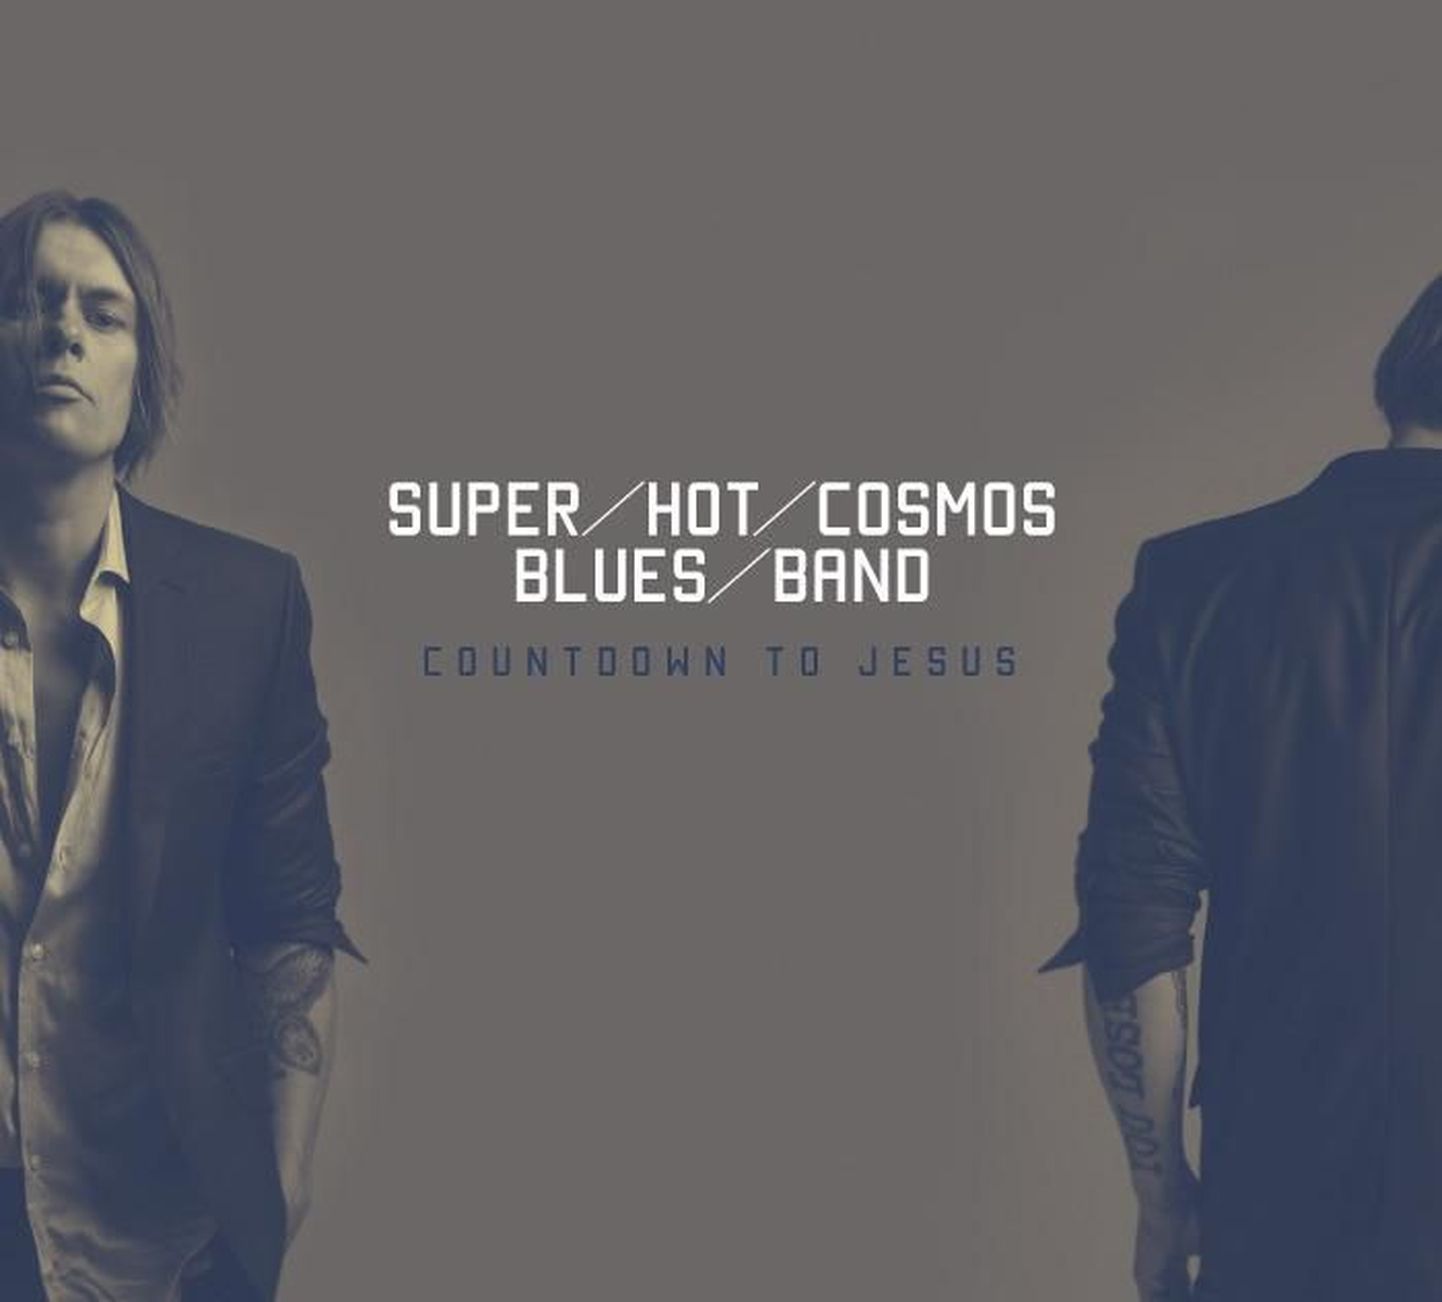 Super Hot Cosmos Blues Band - Countdown to Jesus